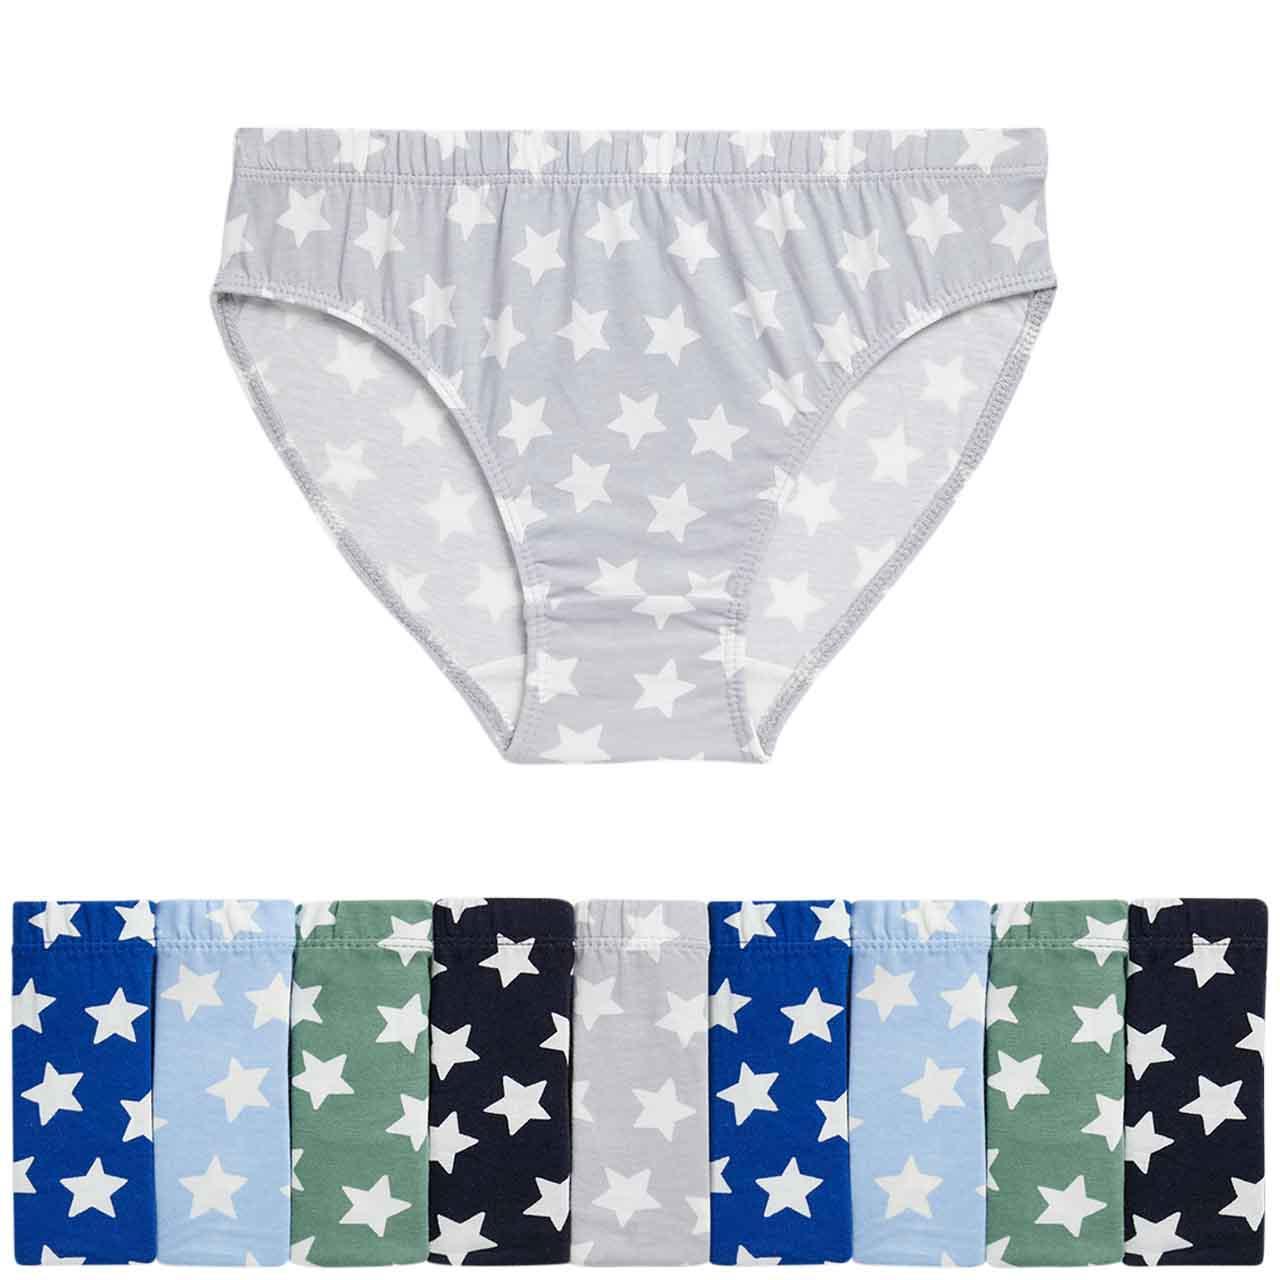 M&S Boys Pure Cotton Star Briefs, 6-7 Years, Blue, 10 pack